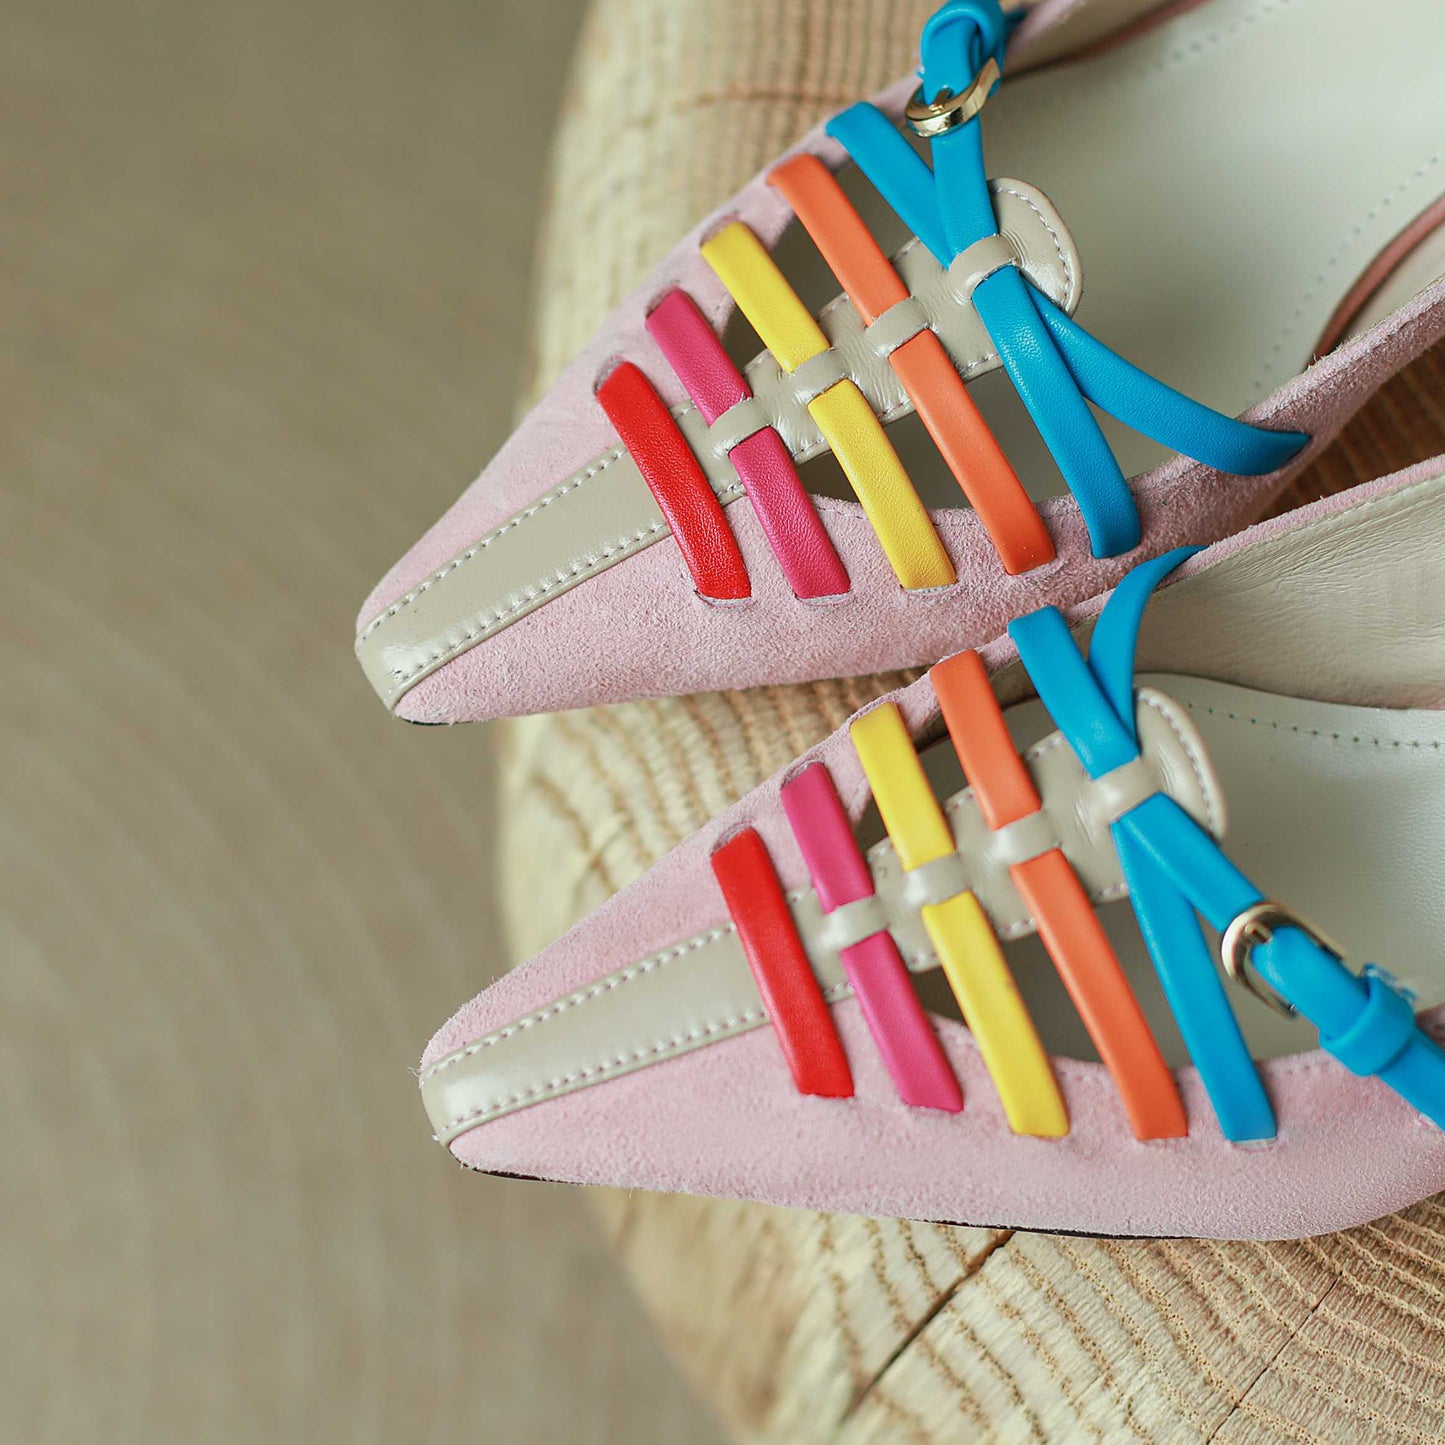 Kid Suede Small Square Toe Thin High Heels  Rainbow Color